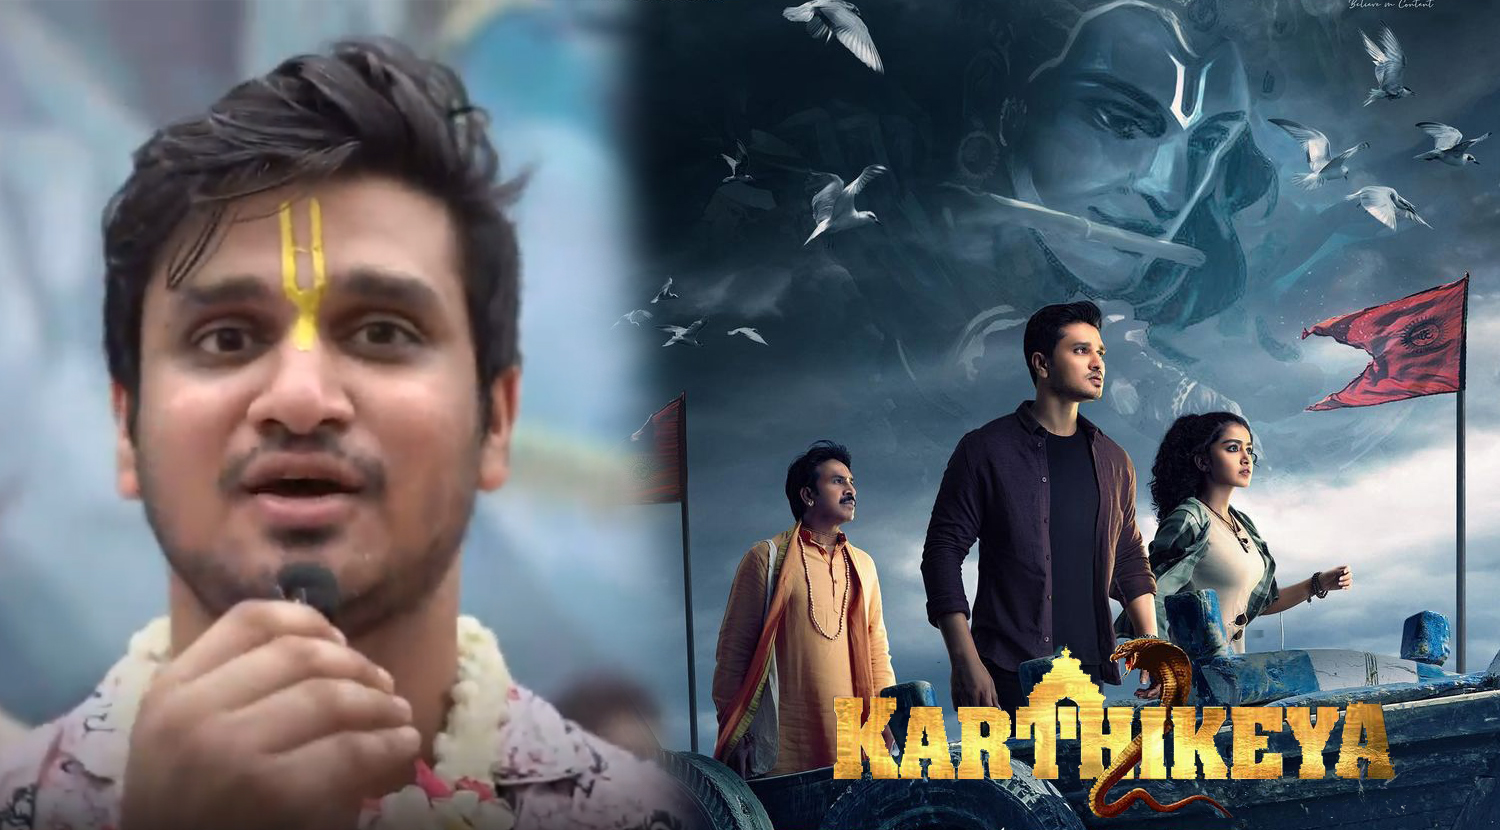 Trending South News Today: Karthikeya 2 continues to rule box